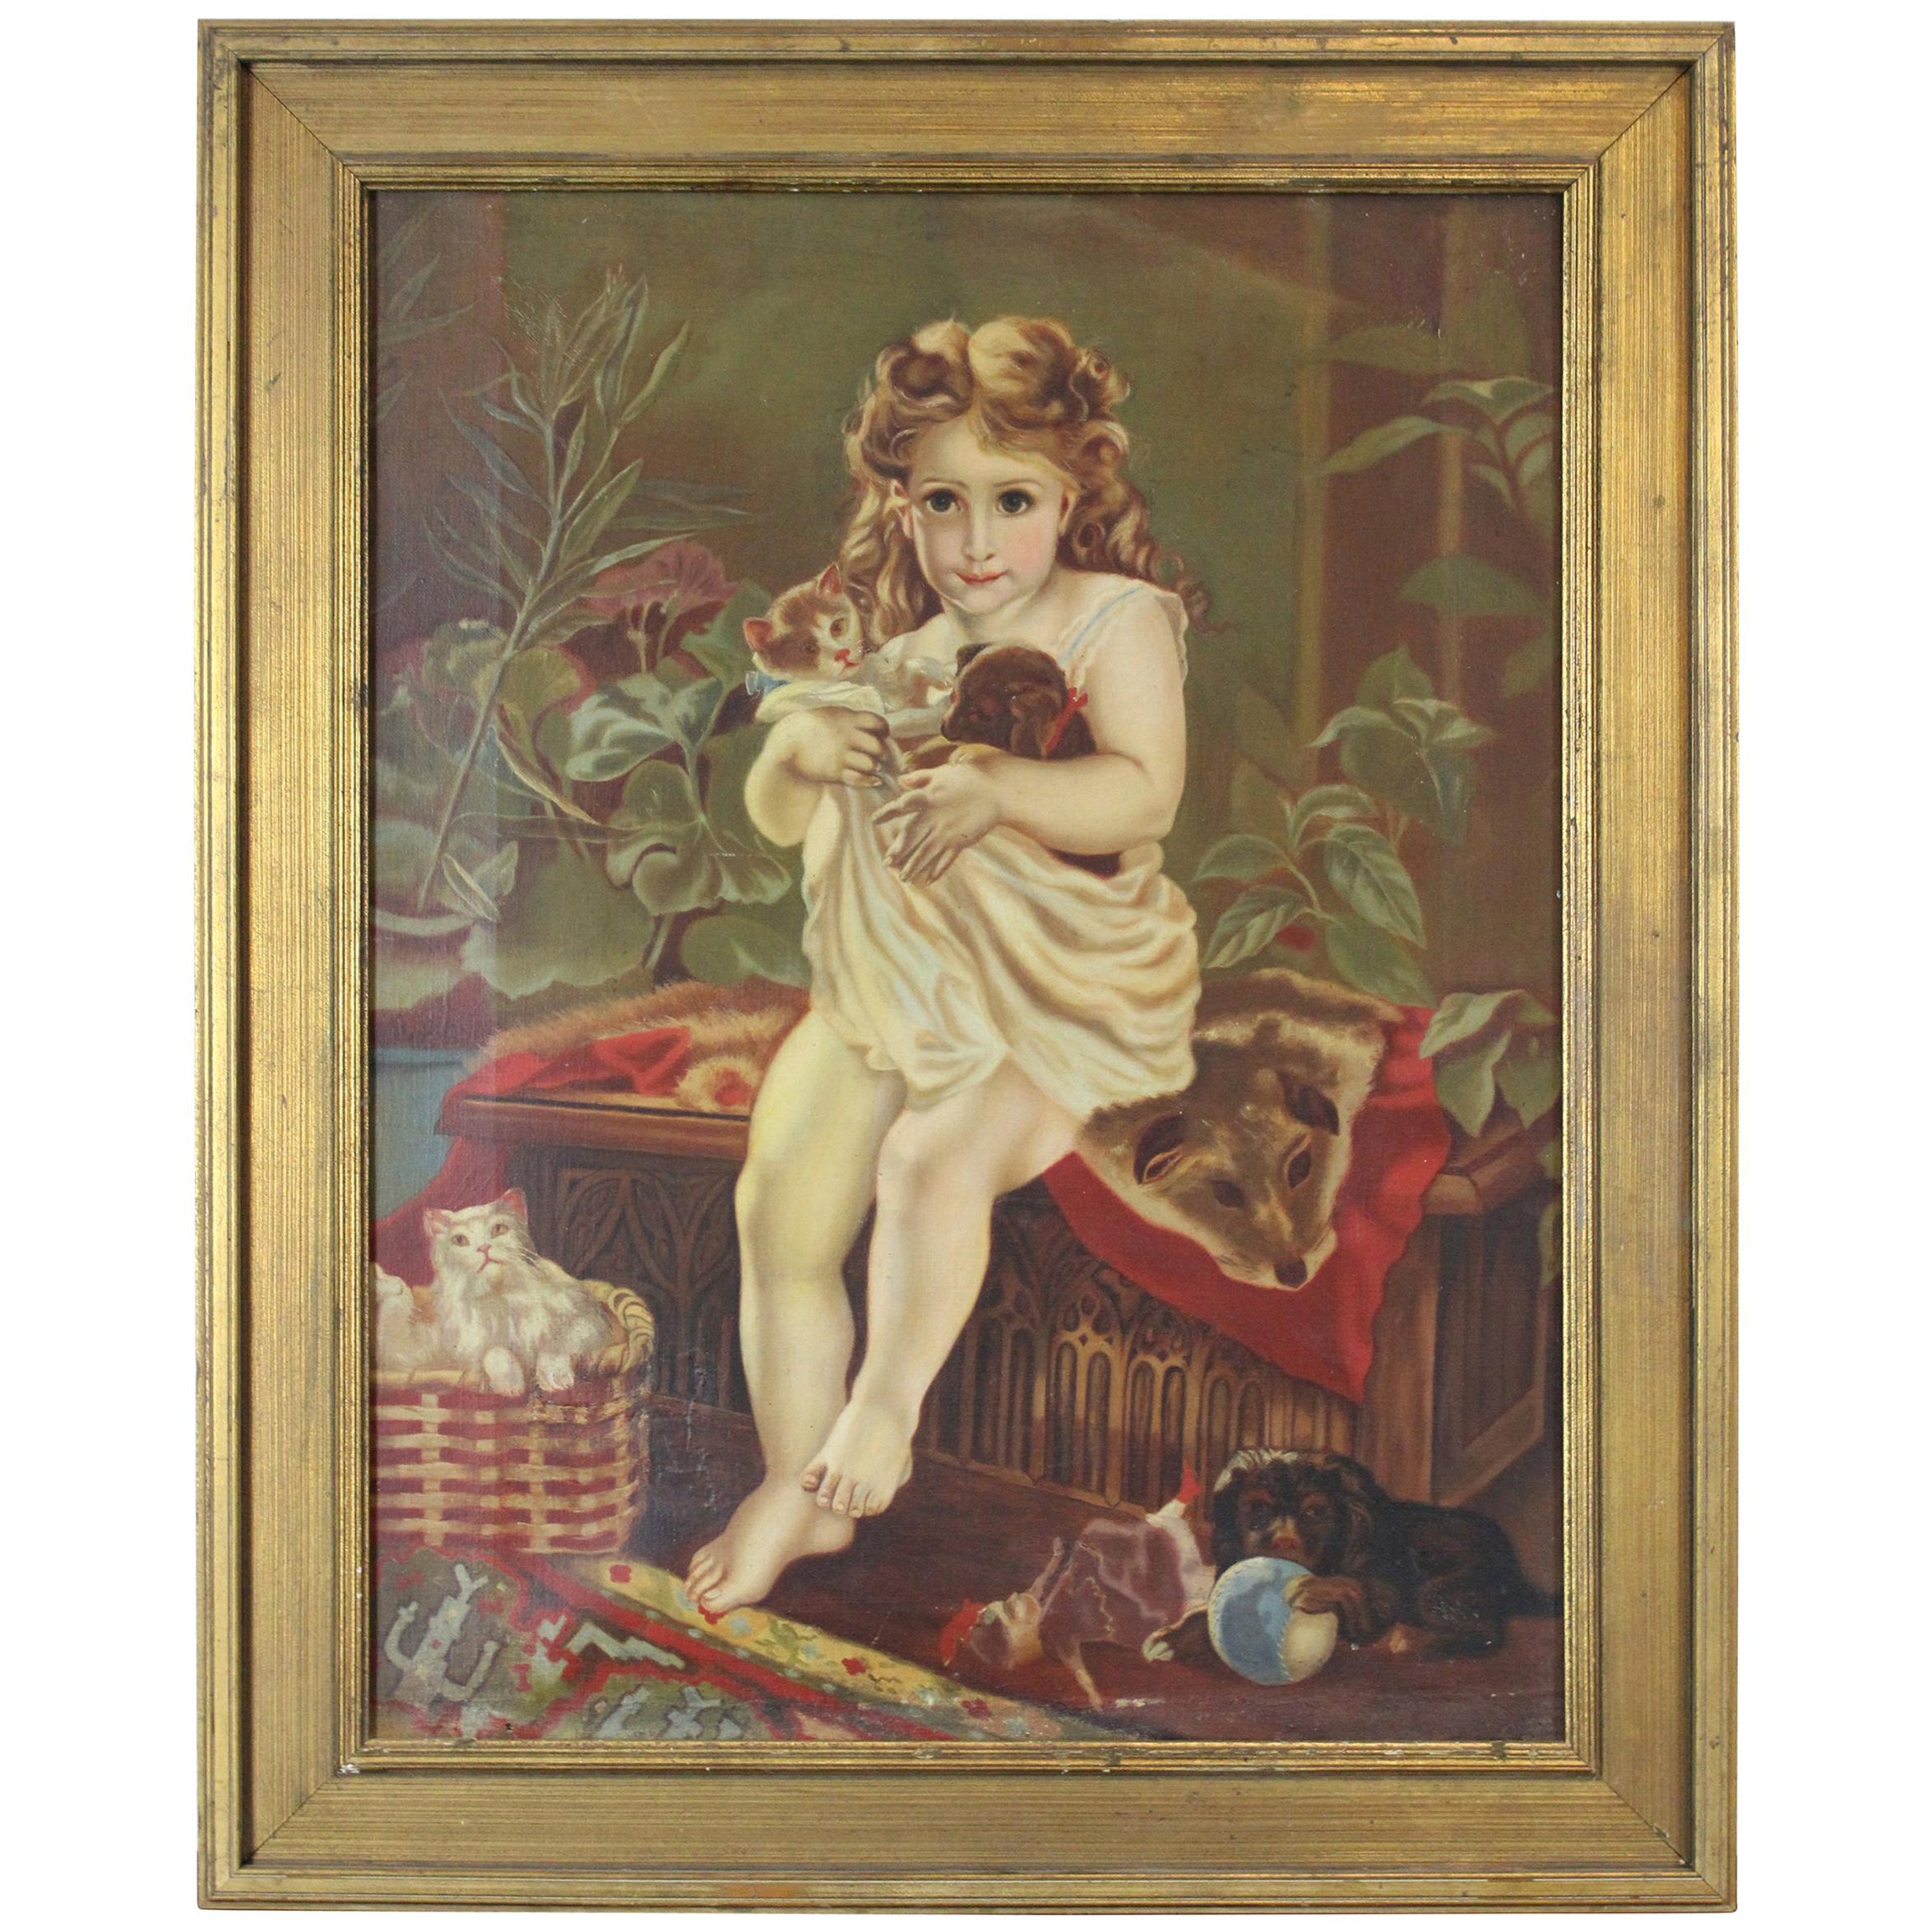 Antique Victorian Oil Portrait Painting of a Young Girl with Cats Dogs